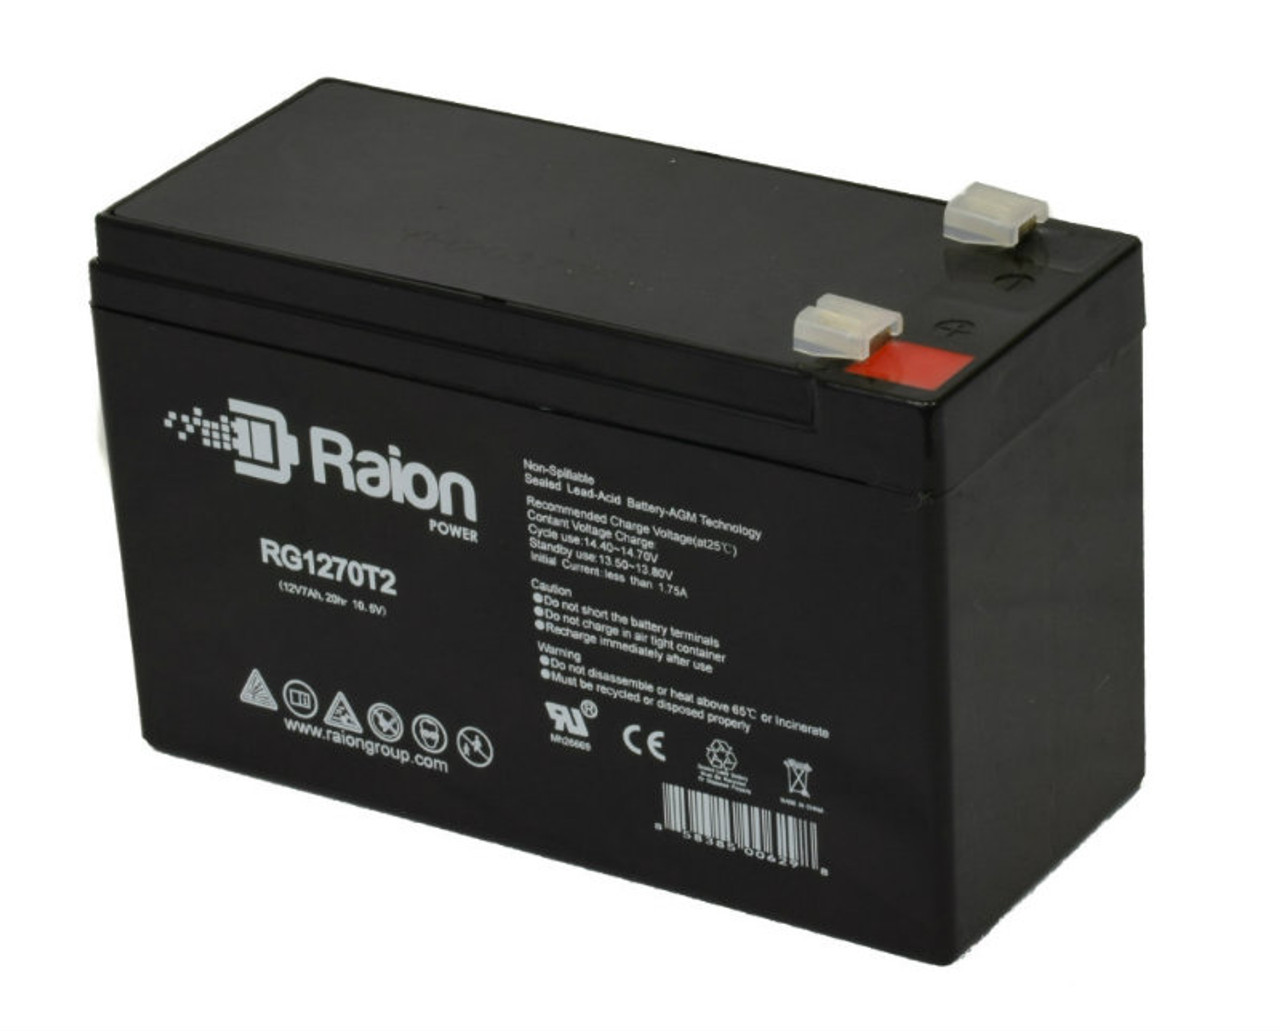 Raion Power RG1270T1 12V 7Ah Non-Spillable Replacement Battery for C Power CS12-7.0 F1